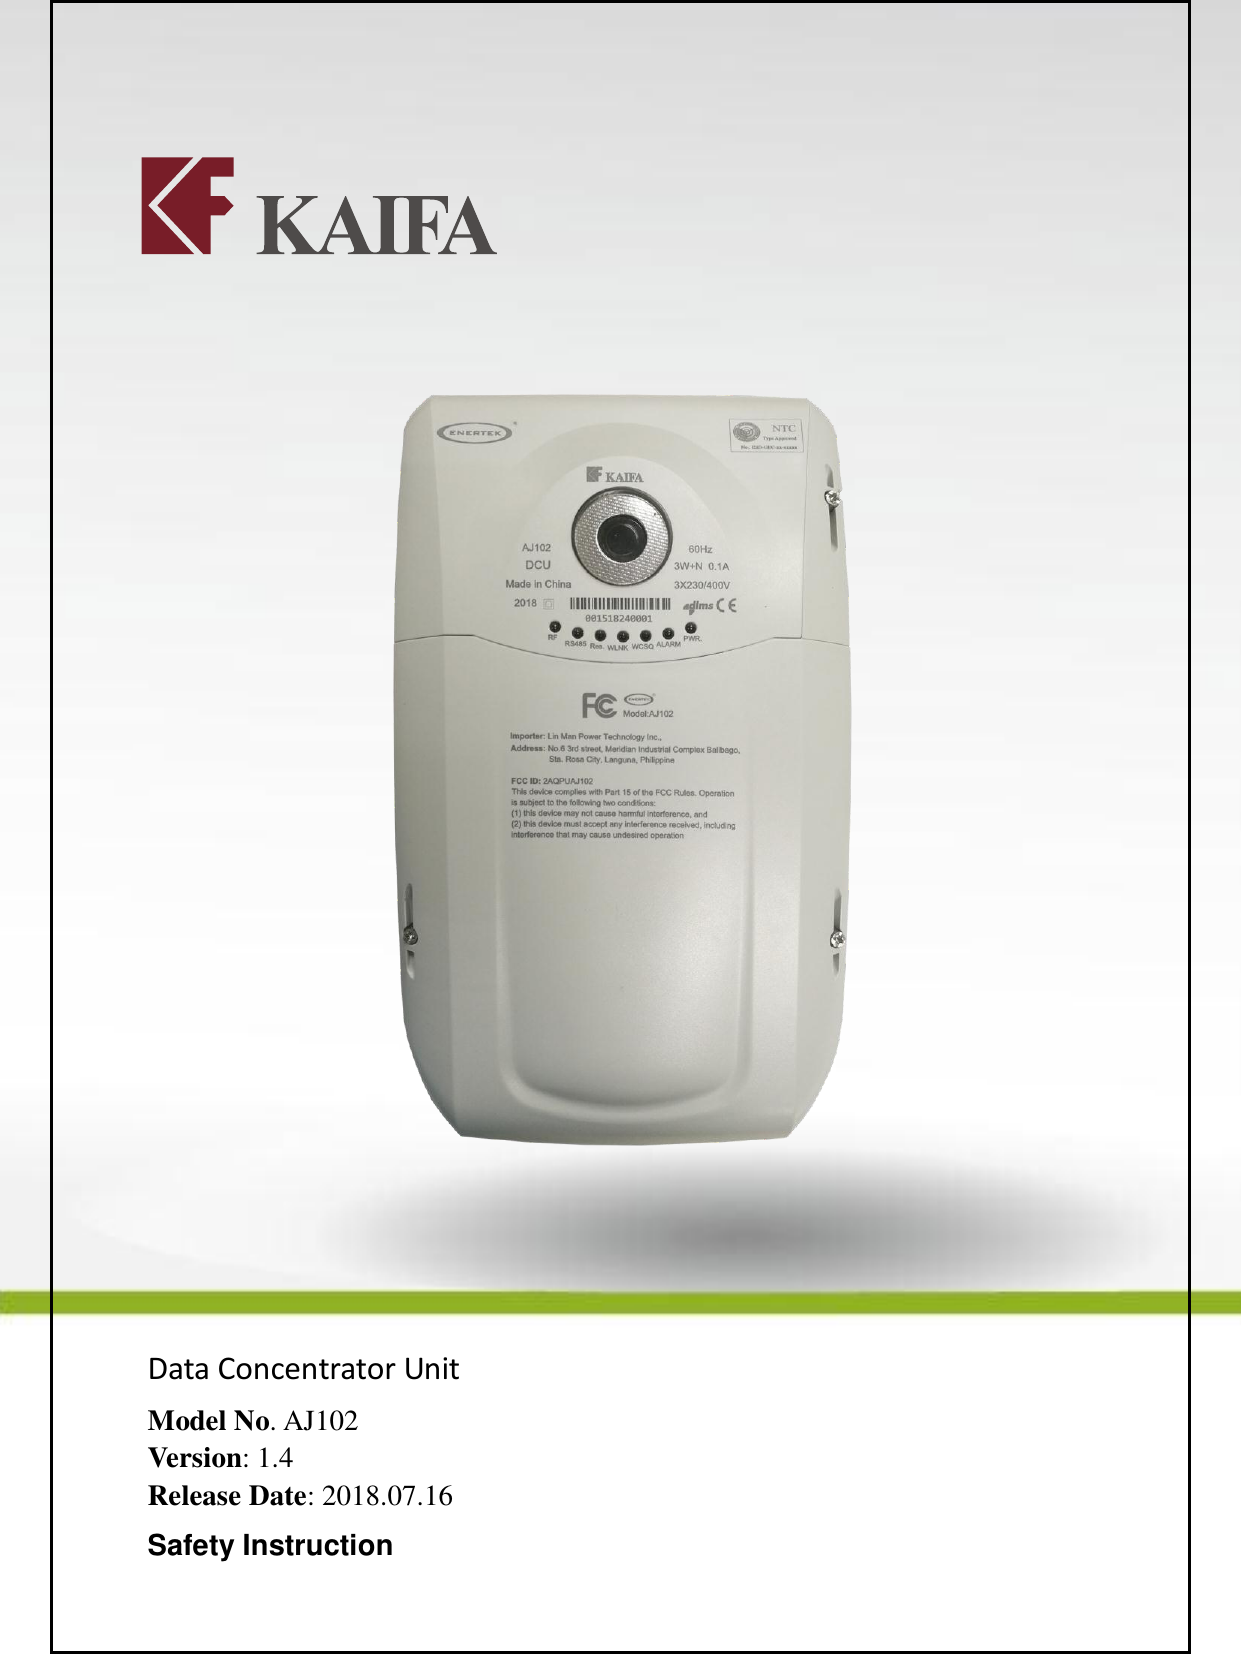 Title: AJ102 Data Concentrator Unit User Manual Ver. 1.4 Page:   1 of 23            Data Concentrator Unit Model No. AJ102 Version: 1.4 Release Date: 2018.07.16 Safety Instruction  